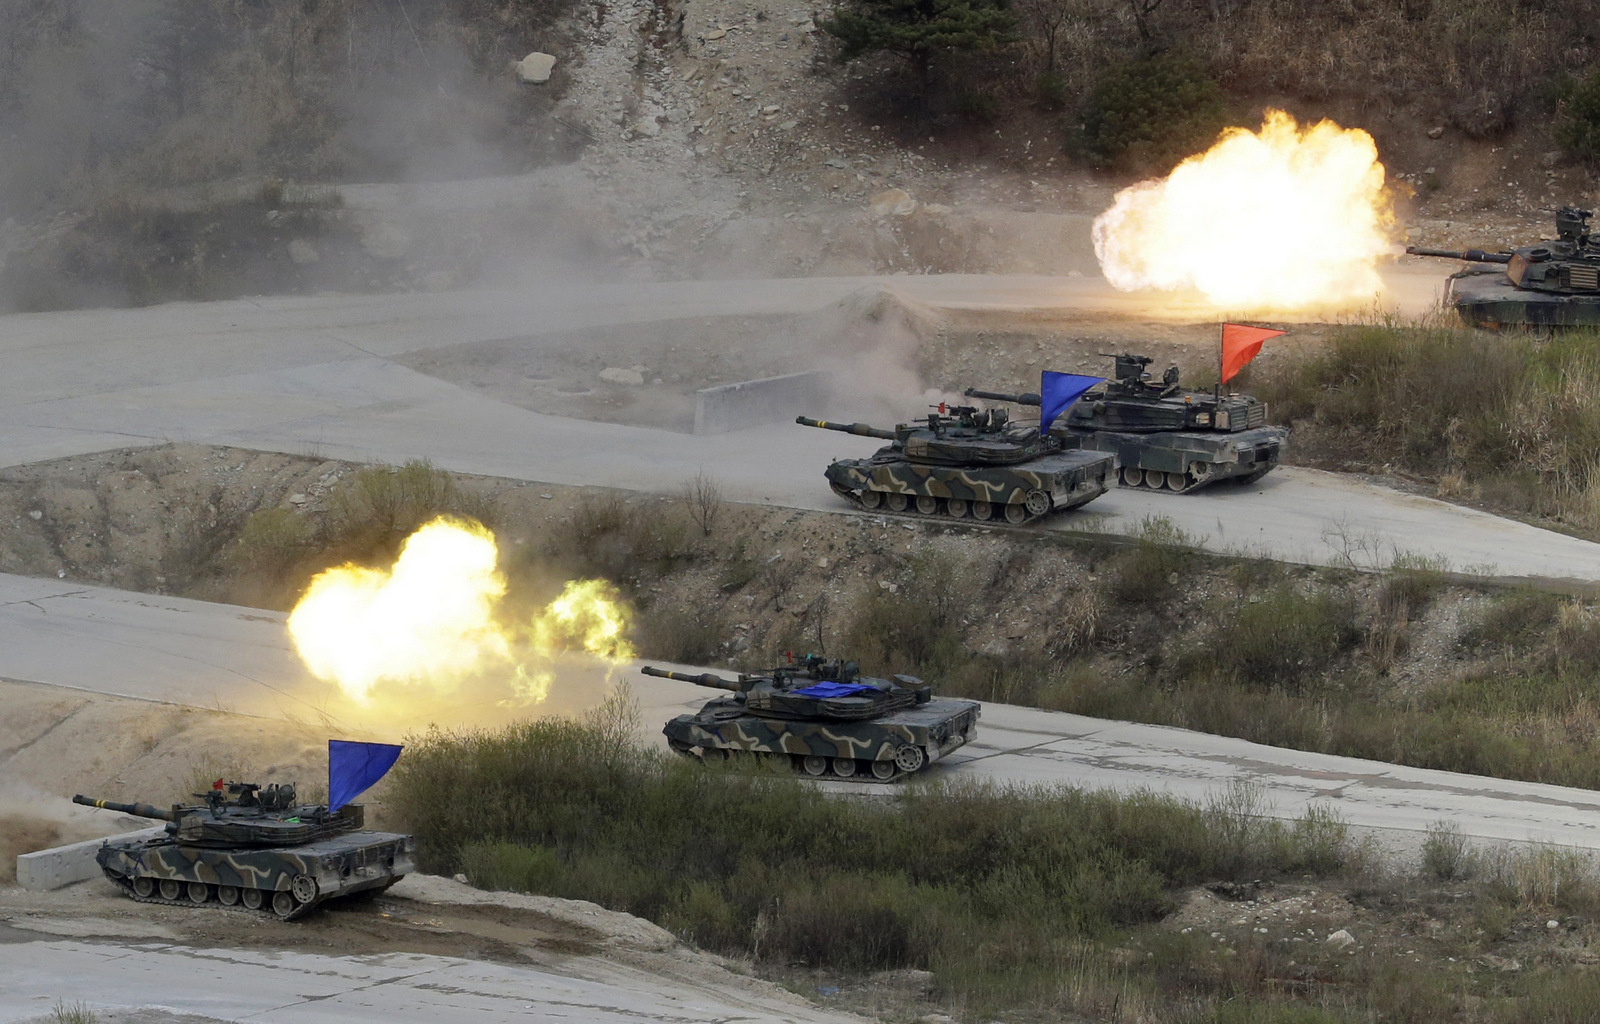 In this April 21, 2017 photo, South Korean and U.S. Army's tanks fire during a South Korea-U.S. joint military live-fire drill at Seungjin Fire Training Field in Pocheon, South Korea, near the border with the North Korea. (AP/Ahn Young-joon)